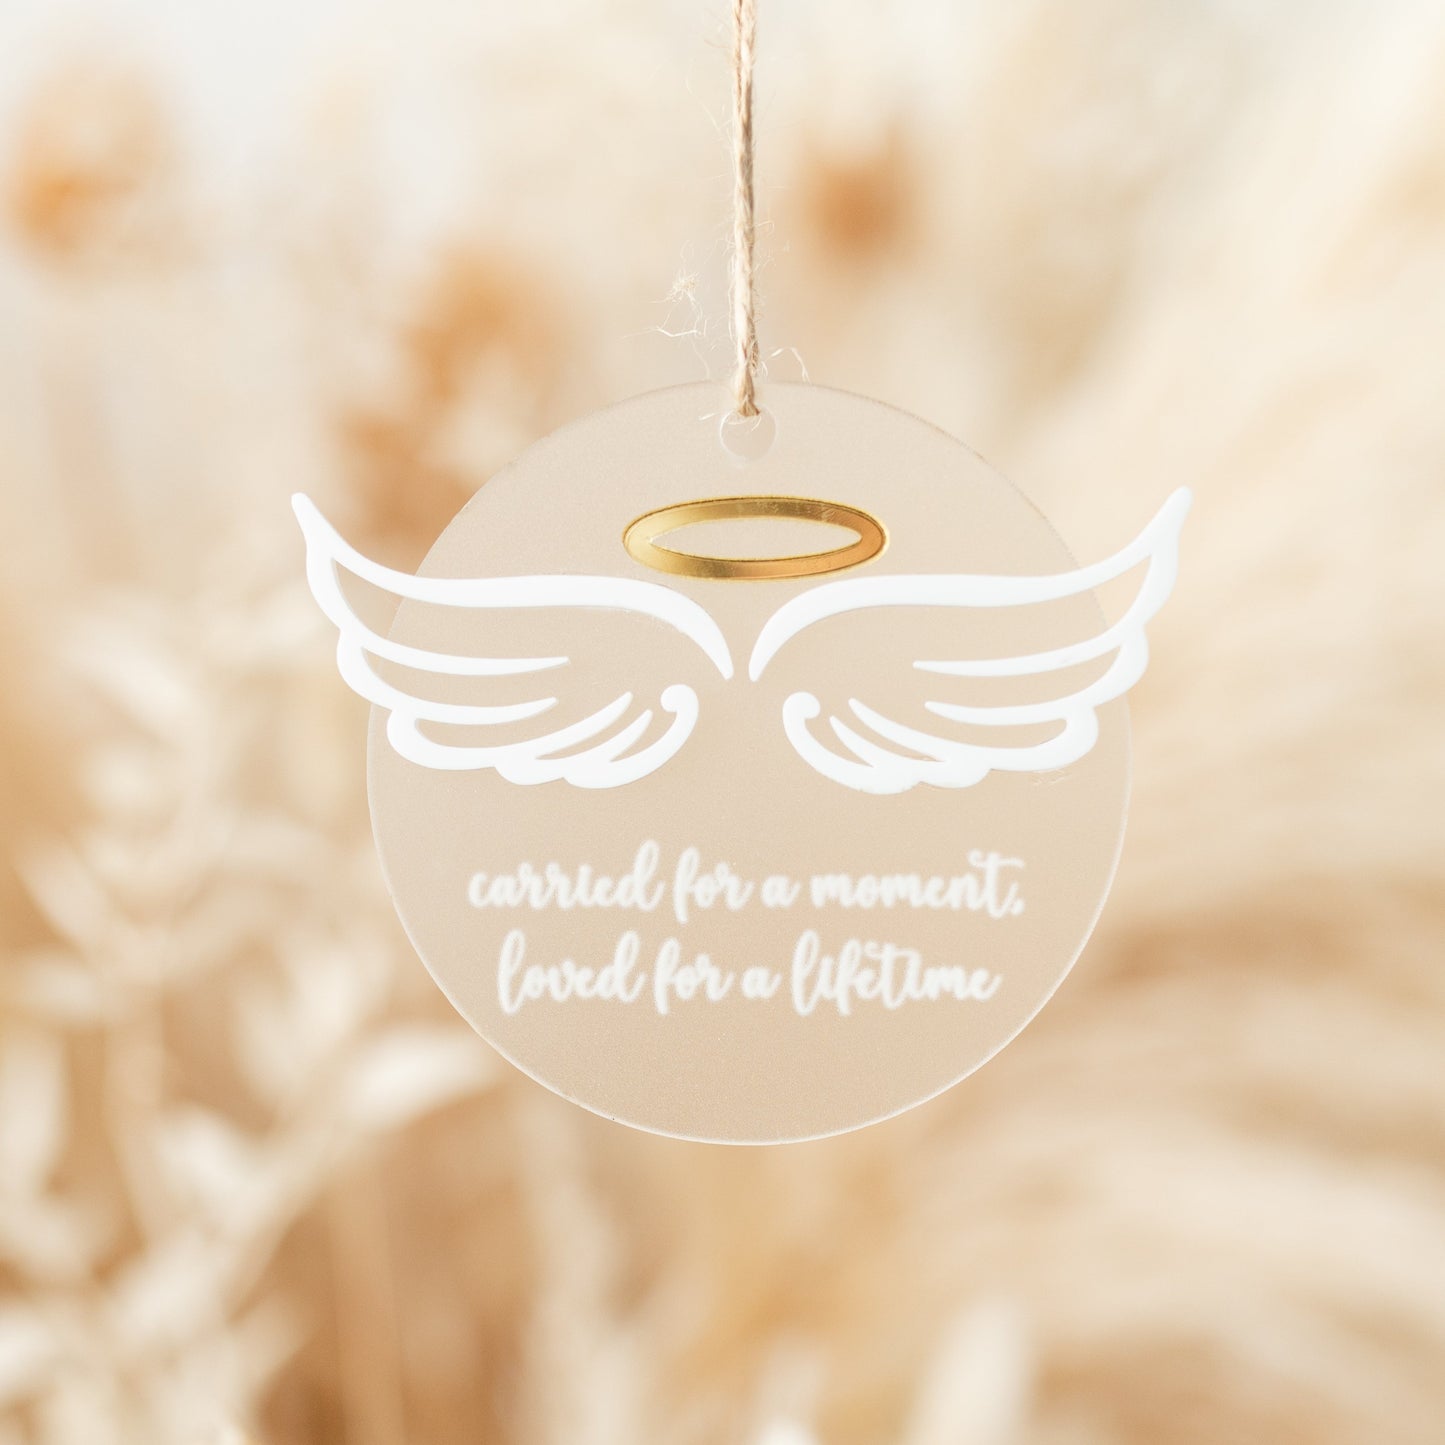 Infant Loss Memorial Ornament - Carried for a moment, Loved for a lifetime